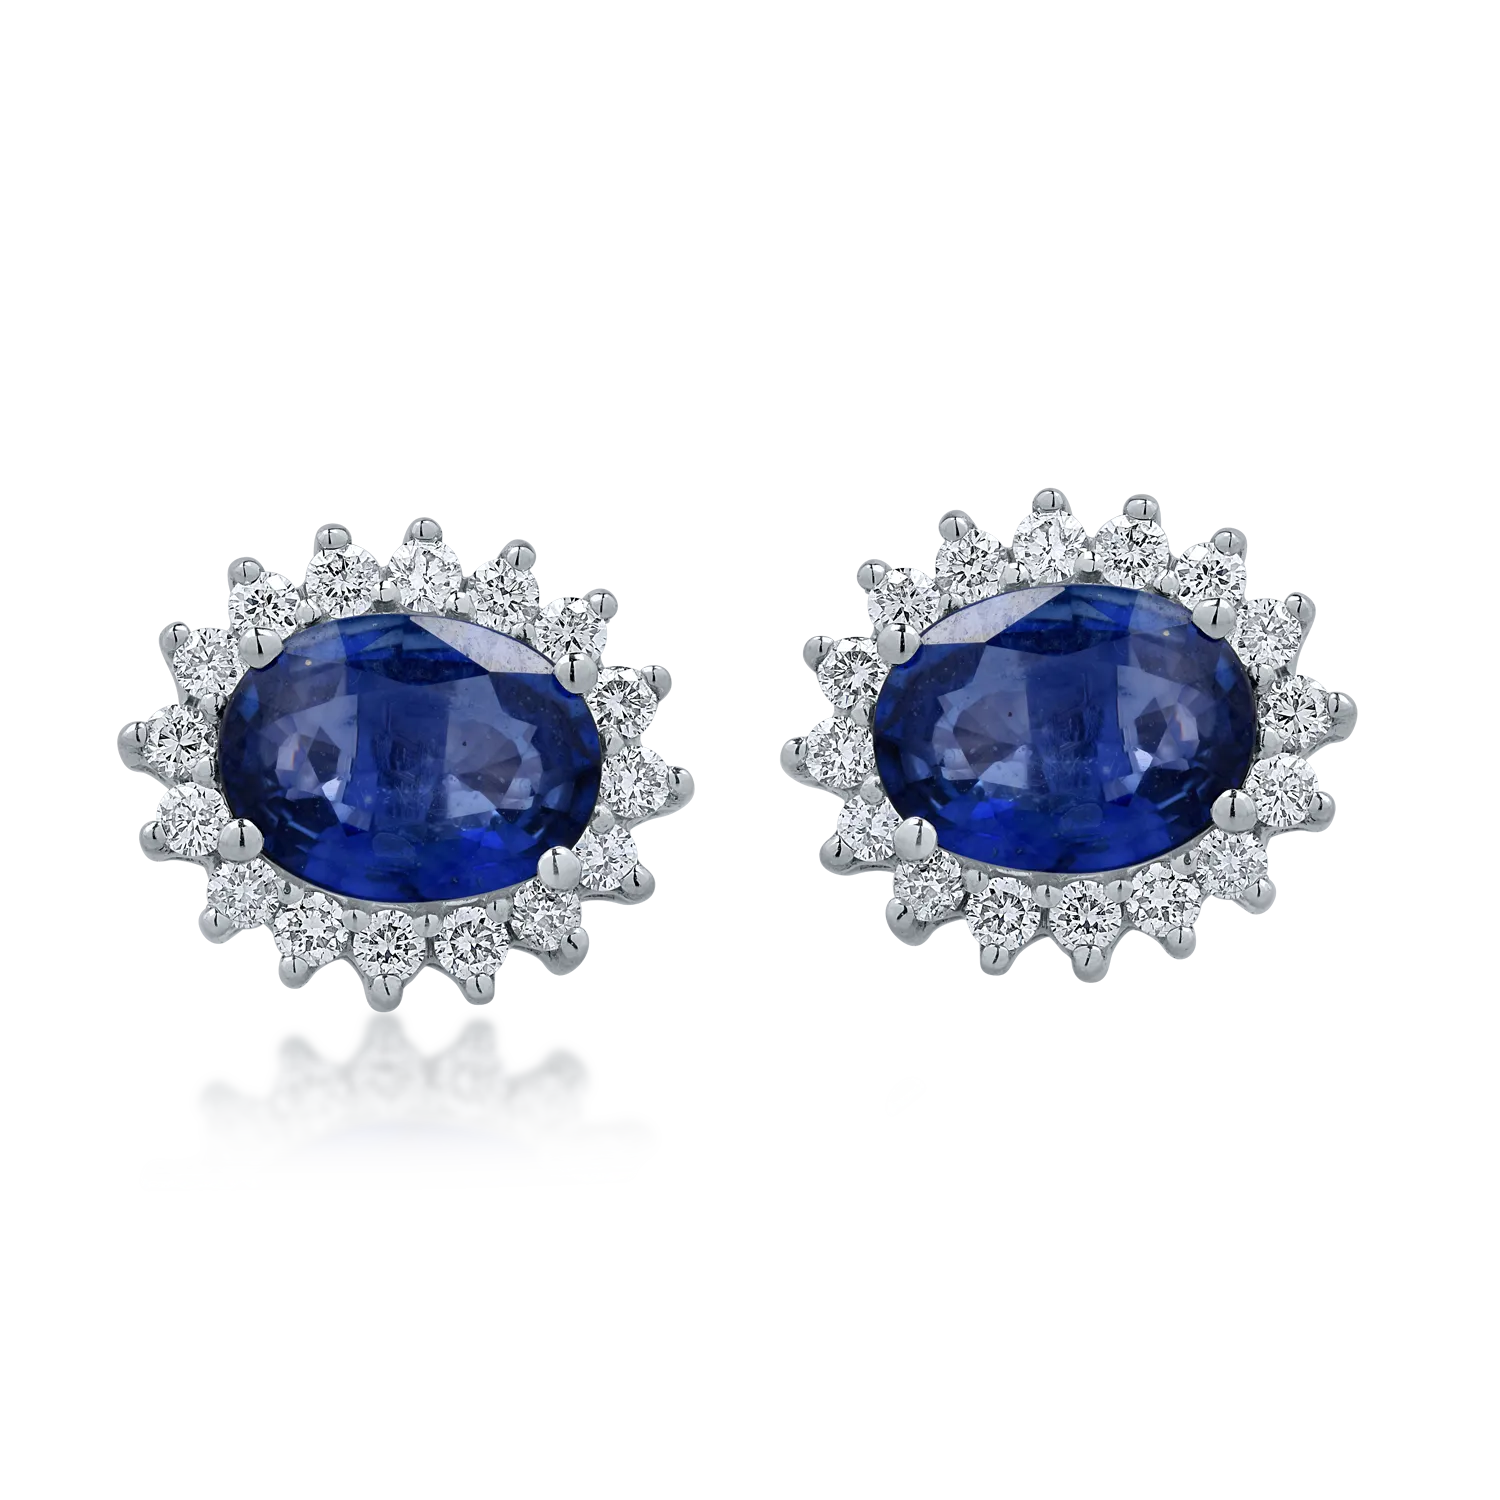 White gold earrings with 3.84ct sapphires and 0.62ct diamonds